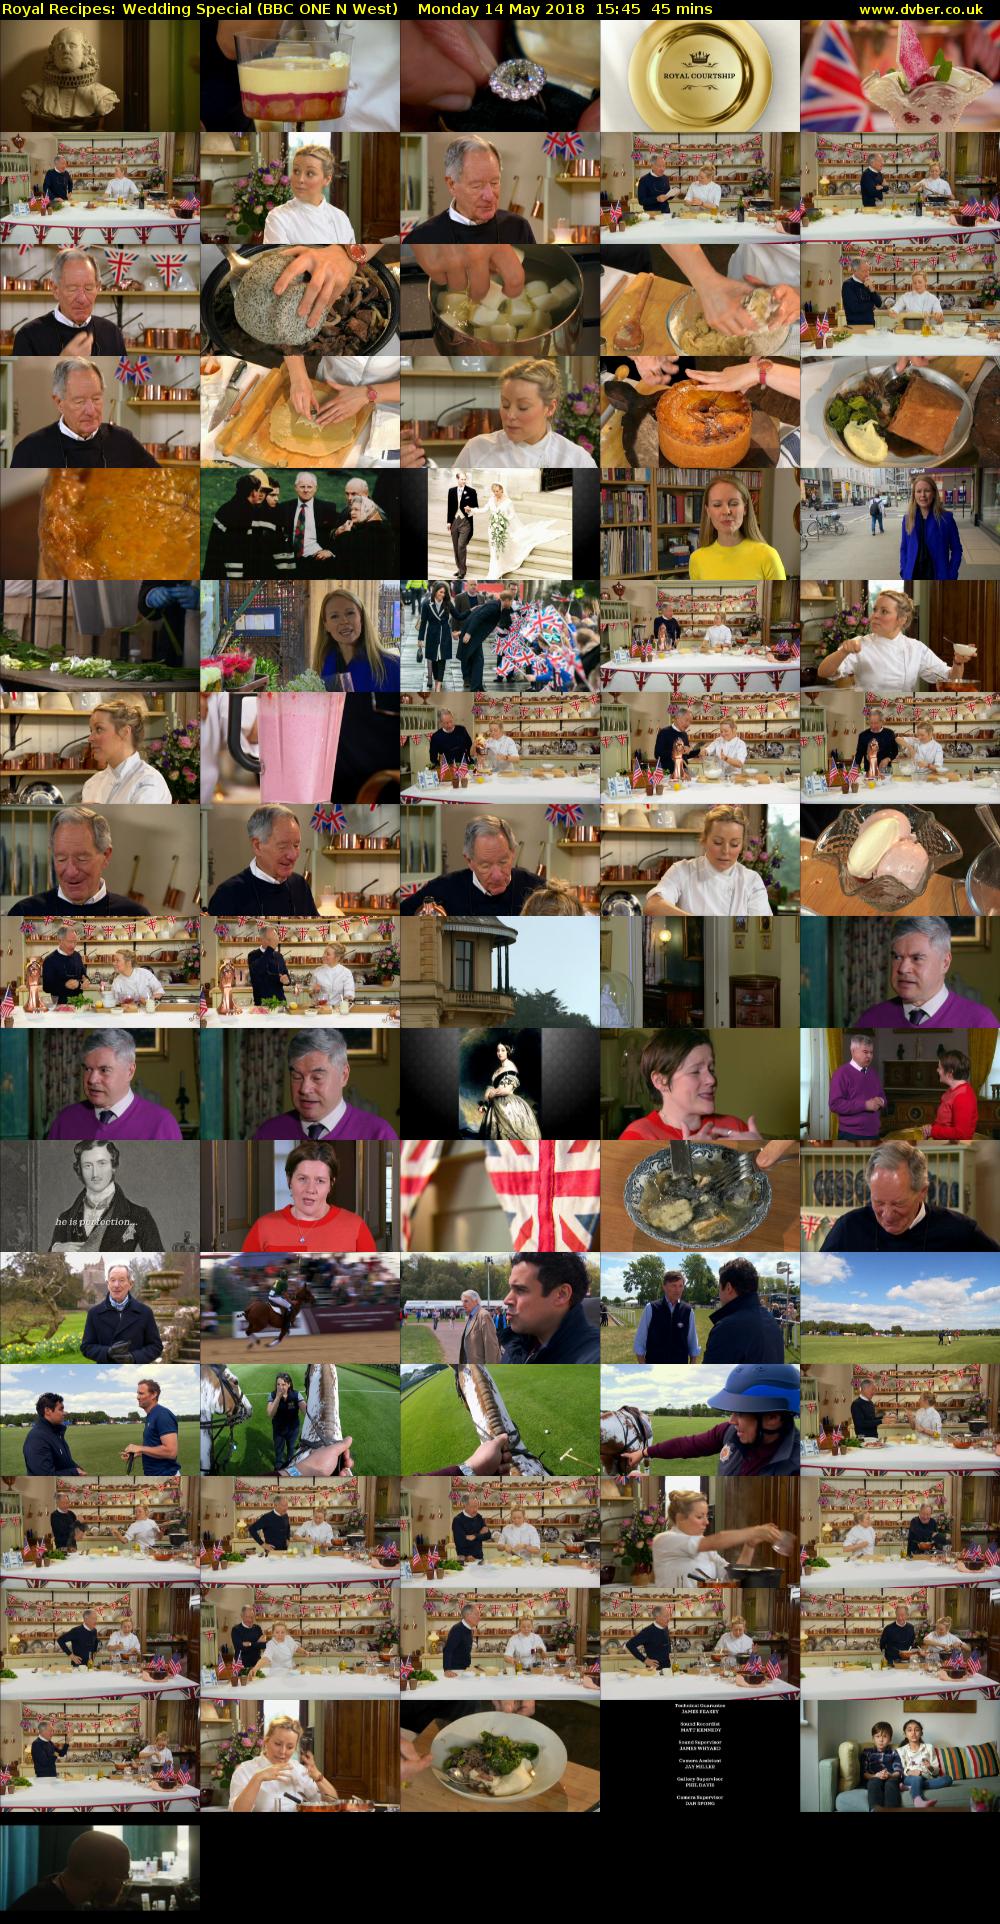 Royal Recipes: Wedding Special (BBC ONE N West) Monday 14 May 2018 15:45 - 16:30